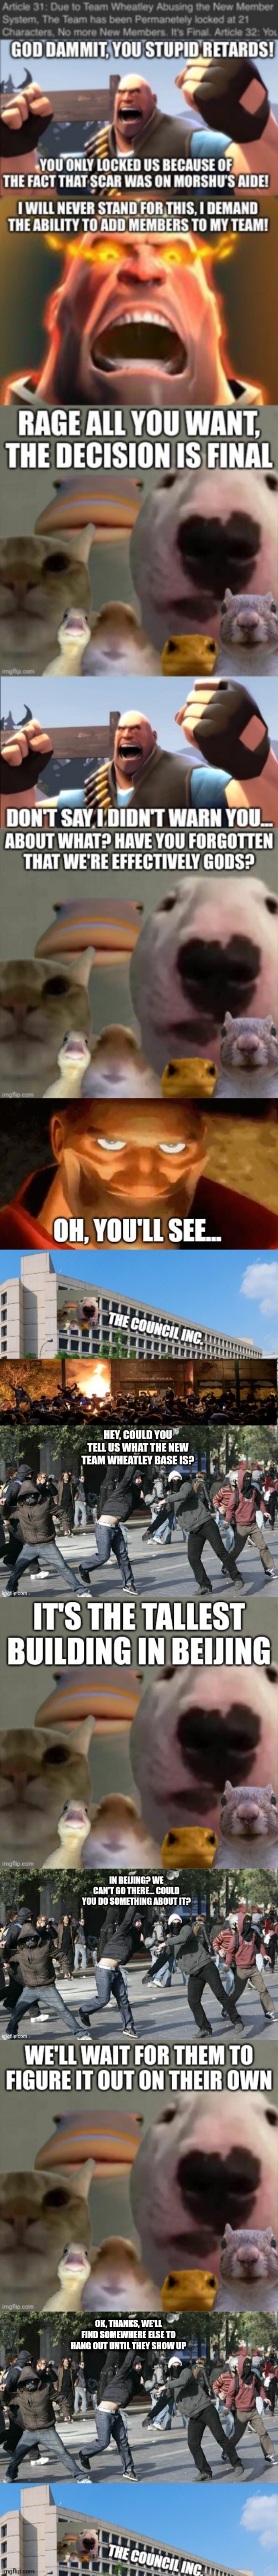 The rioters hate Team Wheatley and were showing respect to The Council, why would they switch sides with that one event? | OK, THANKS, WE'LL FIND SOMEWHERE ELSE TO HANG OUT UNTIL THEY SHOW UP | image tagged in rioters | made w/ Imgflip meme maker